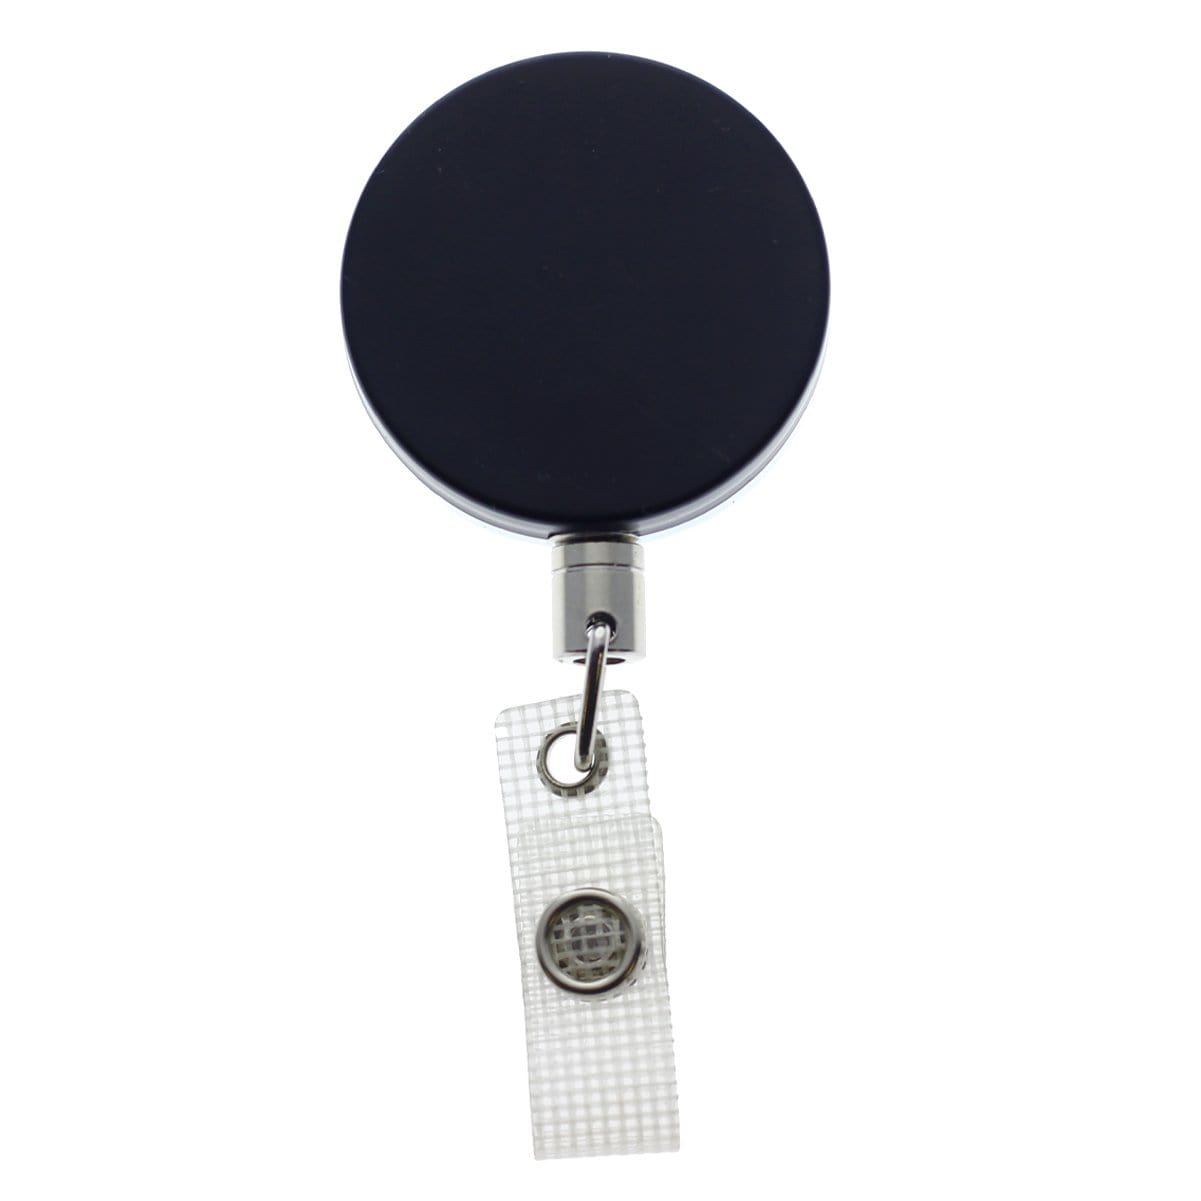 A black circular Heavy Duty Badge Reel With Chain (P/N 2120-3375) with a retractable chain and belt clip attached.